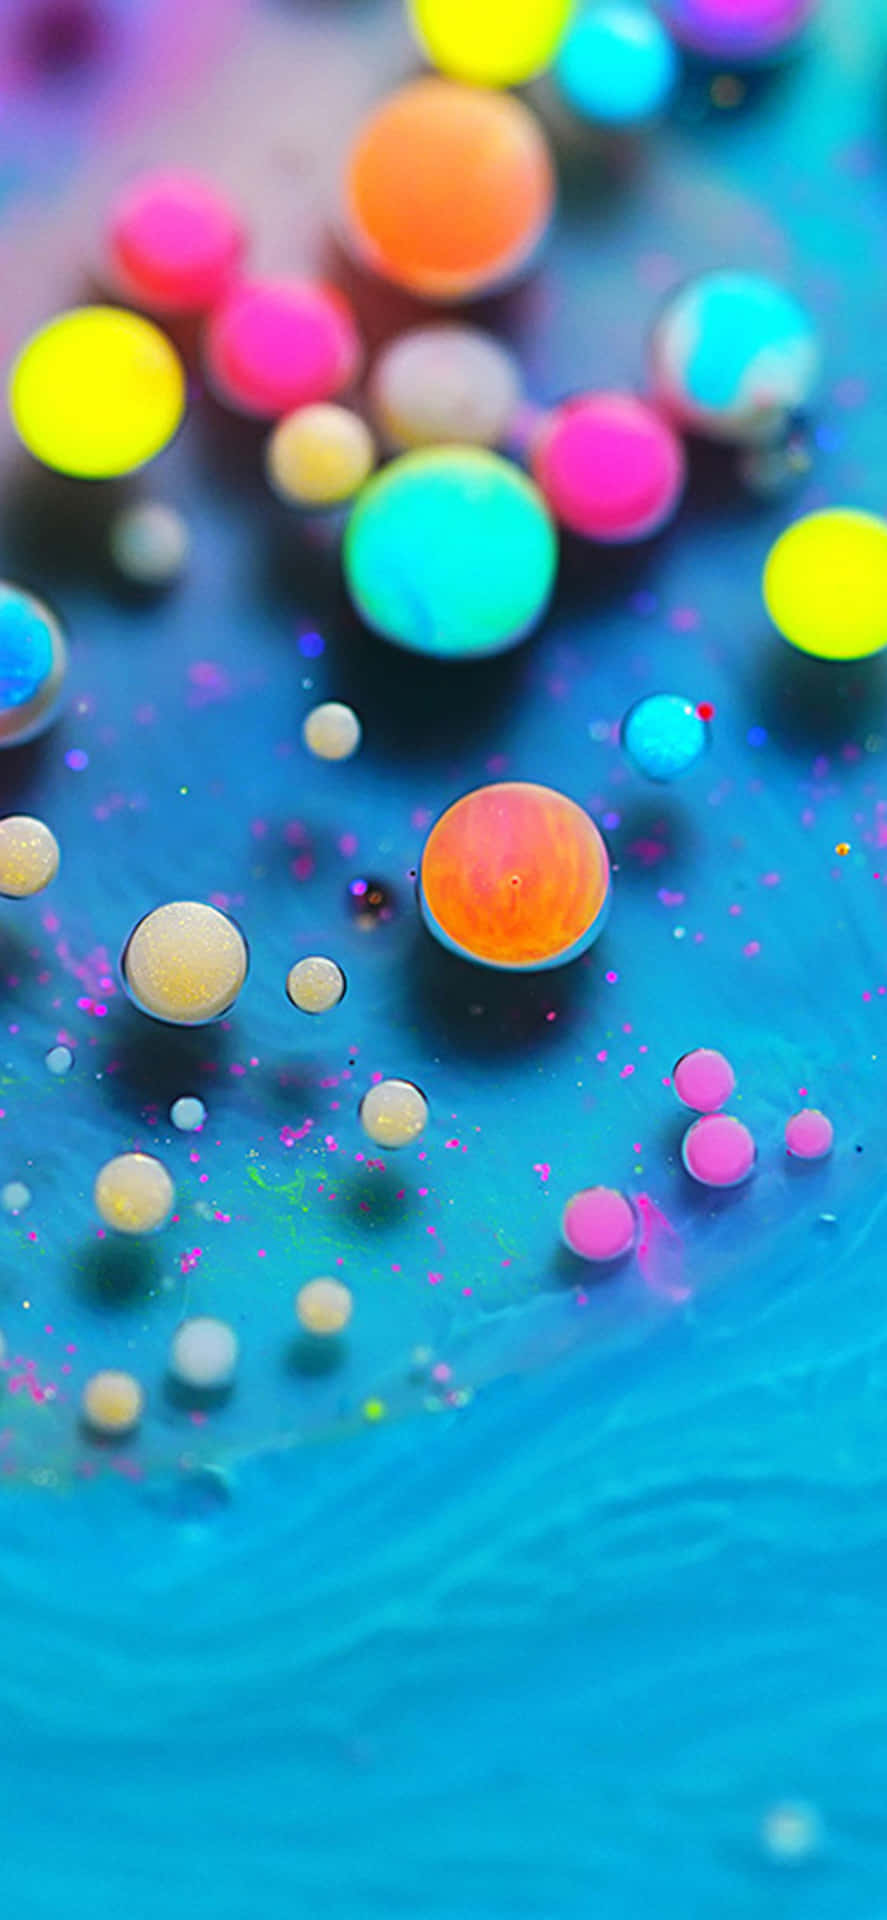 Colorful Bubbles Floating In A Blue Liquid Wallpaper